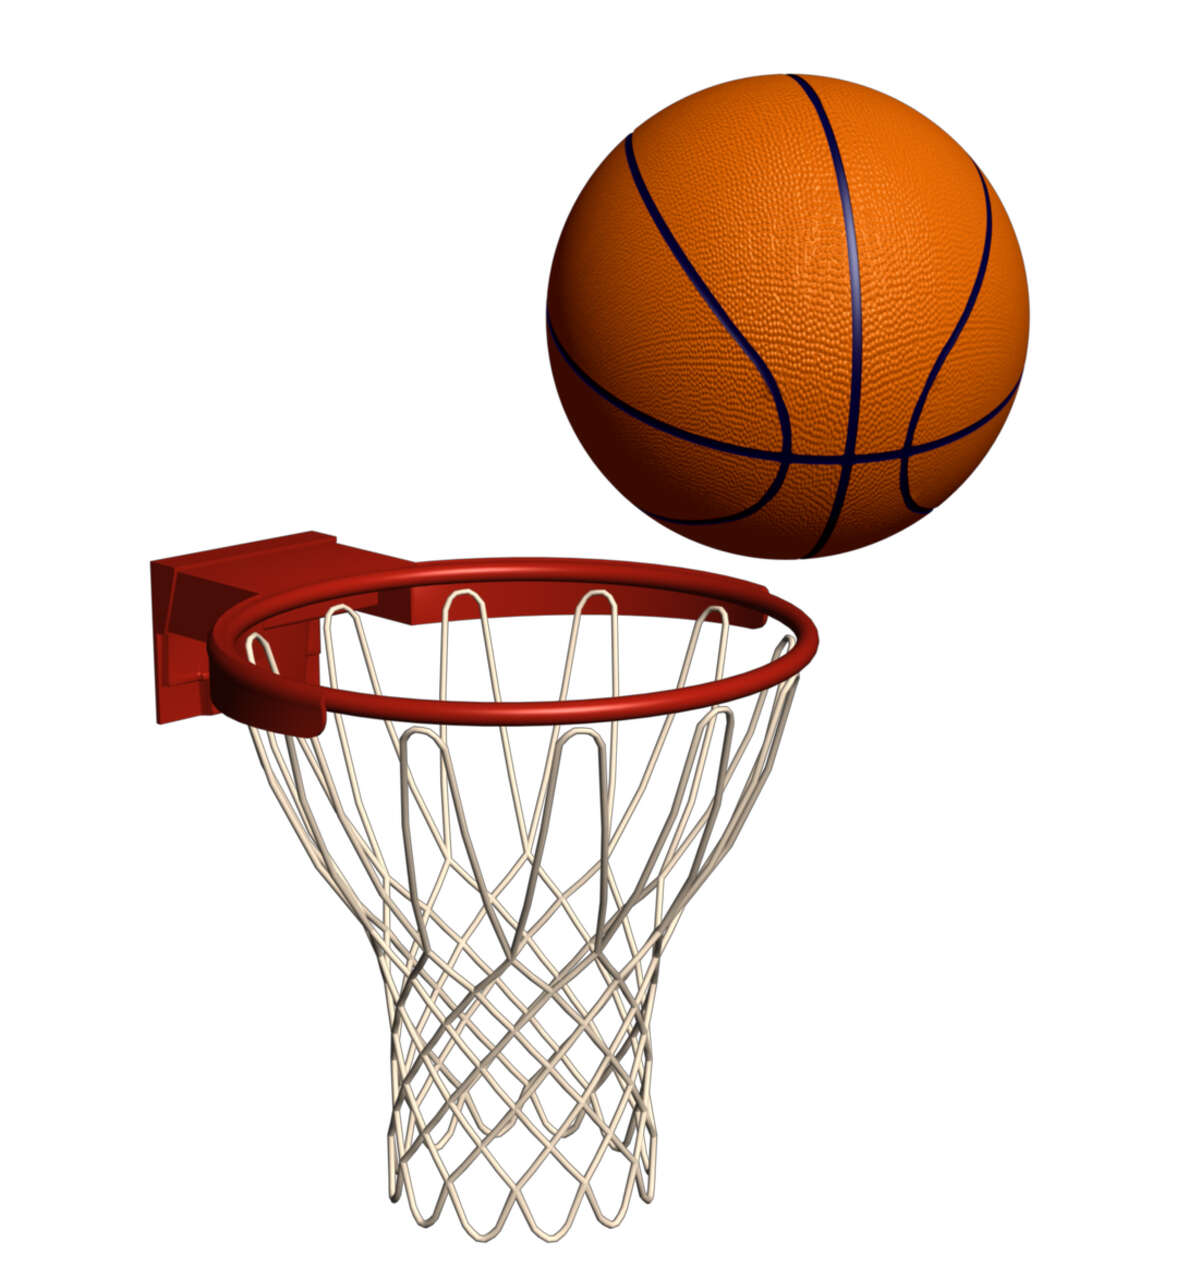 Graphic shows a basketball bouncing off a rim.